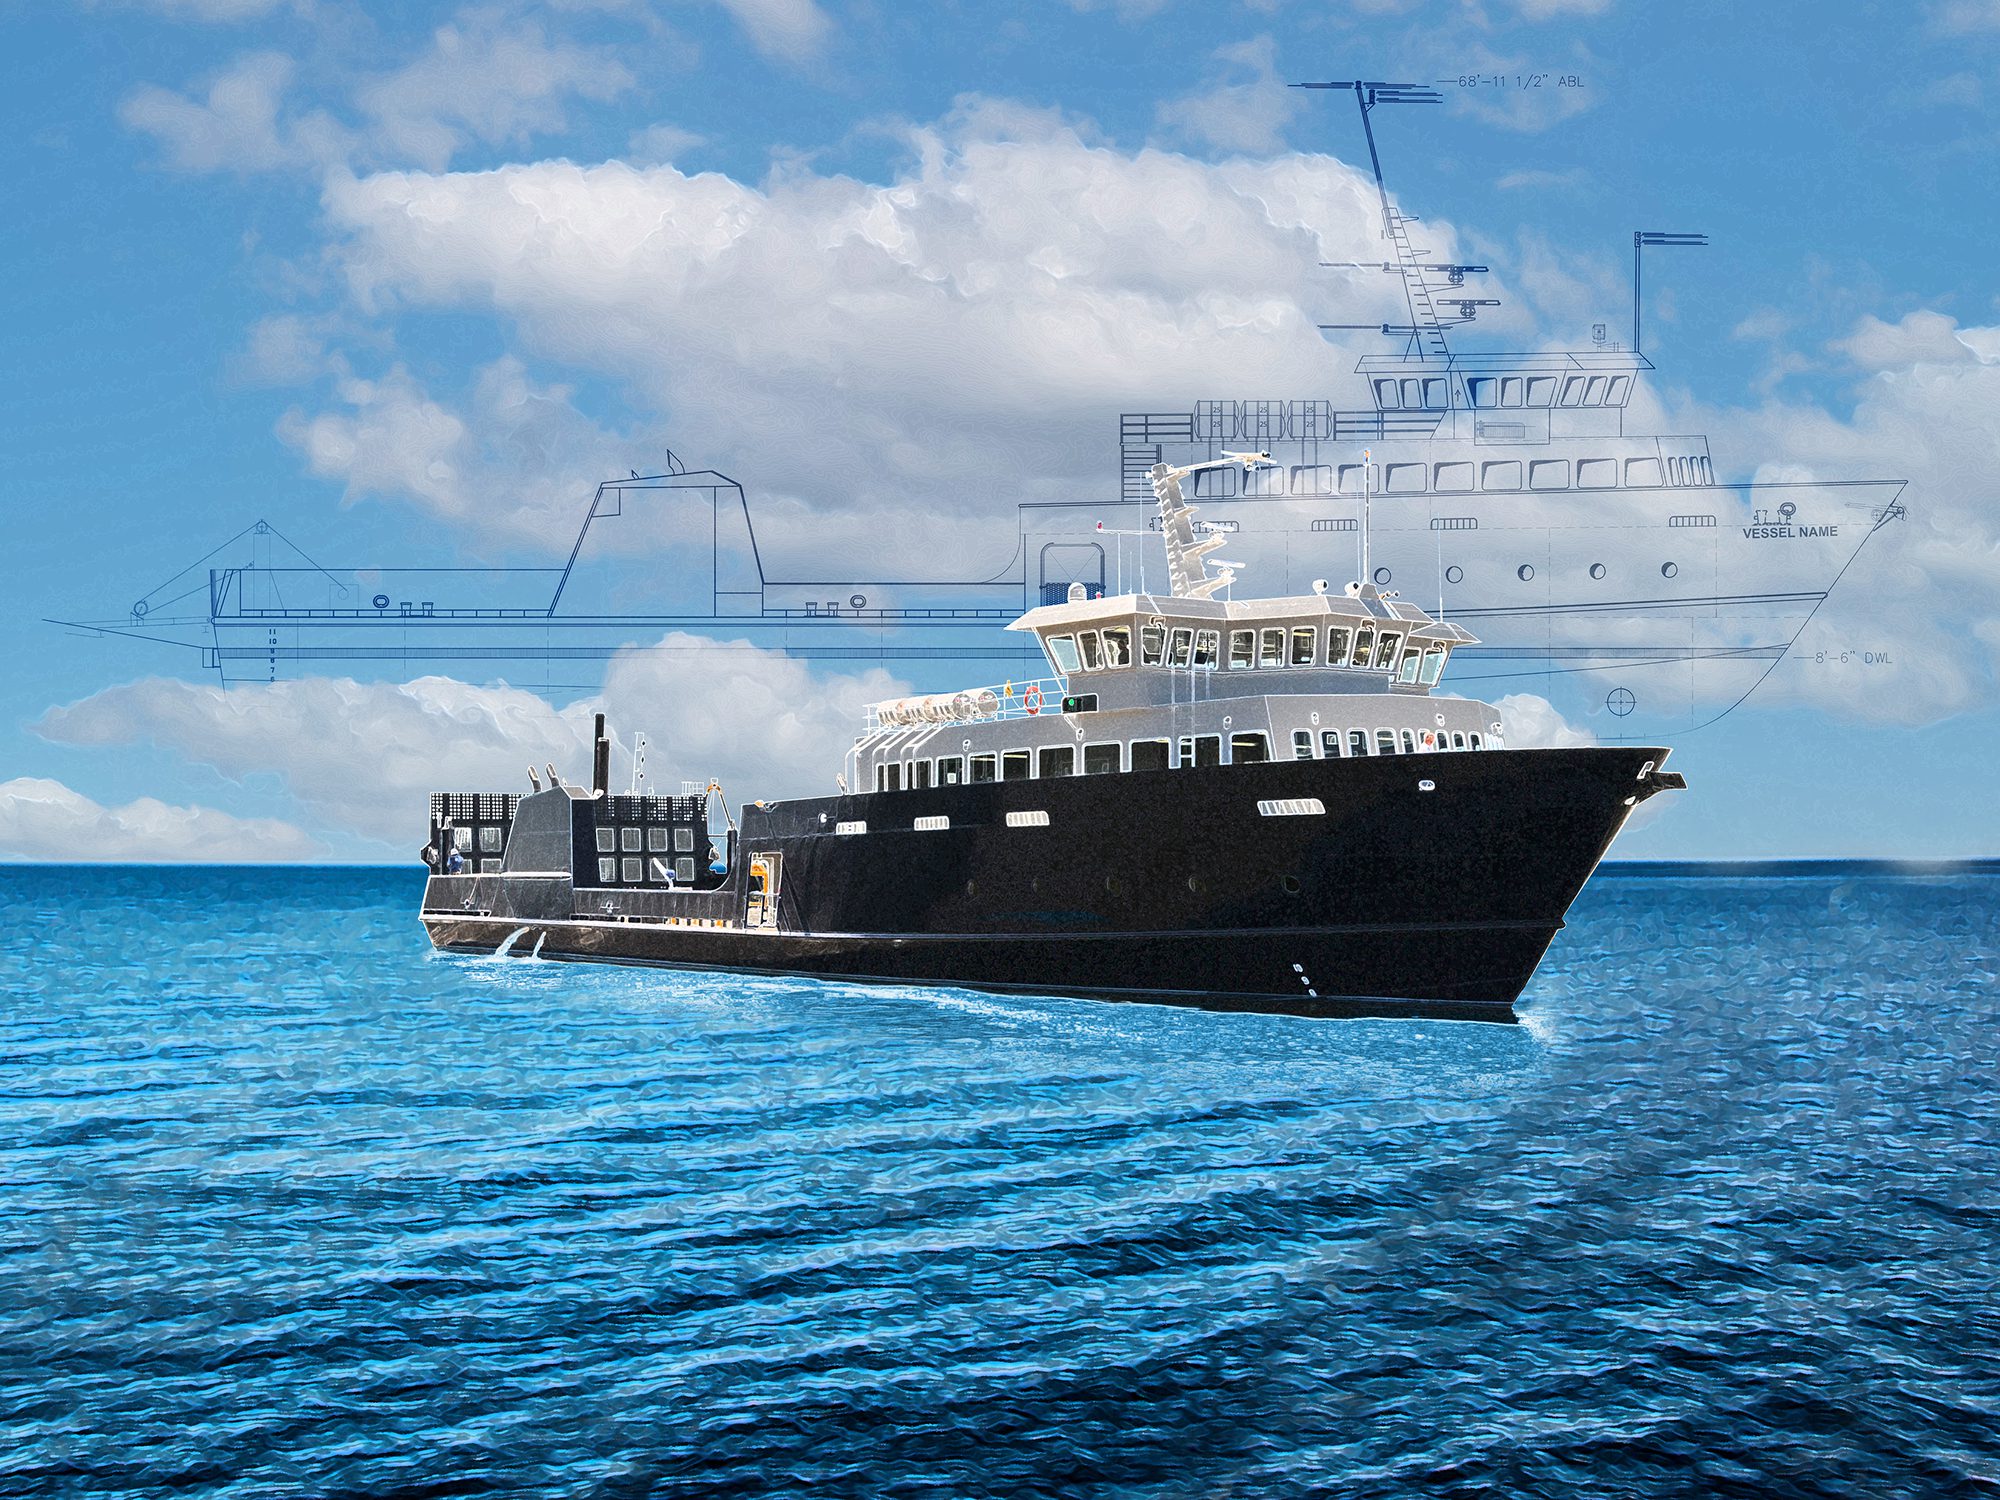 An illustration of the four ferries for the Puerto Rico Maritime Transit Authority. Image credit: Conrad Shipyards